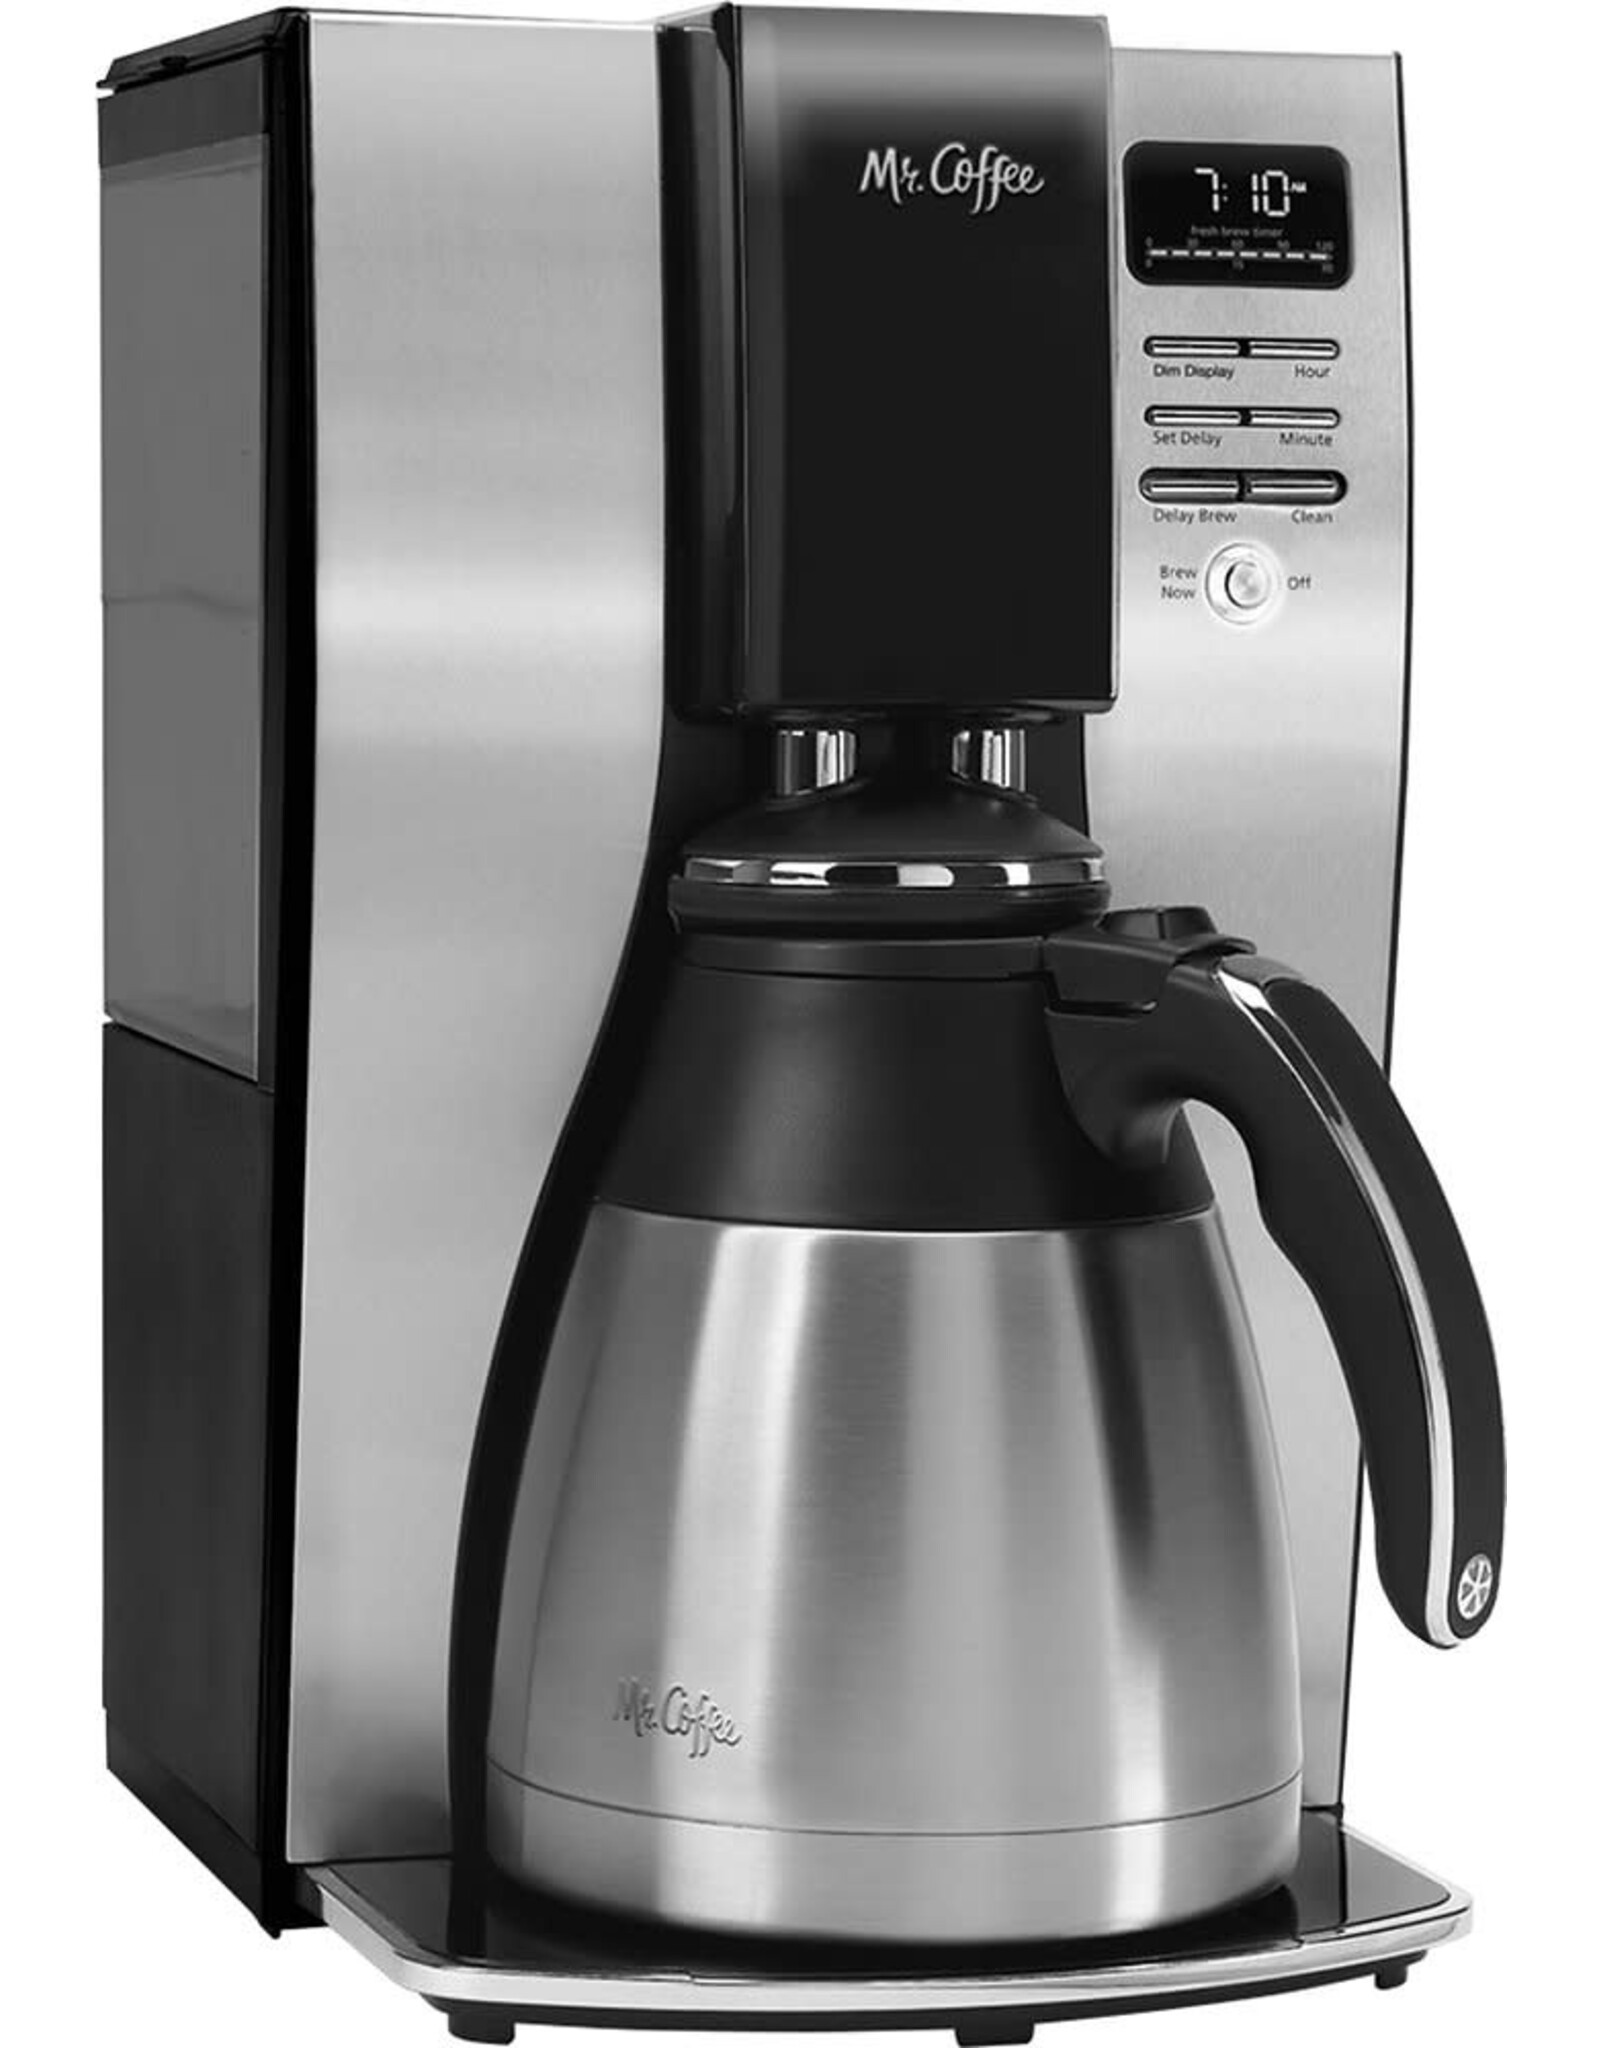 mr. coffee 2131962 Mr. Coffee - 10-Cup Coffee Maker with Thermal Carafe - Stainless-Steel/Black